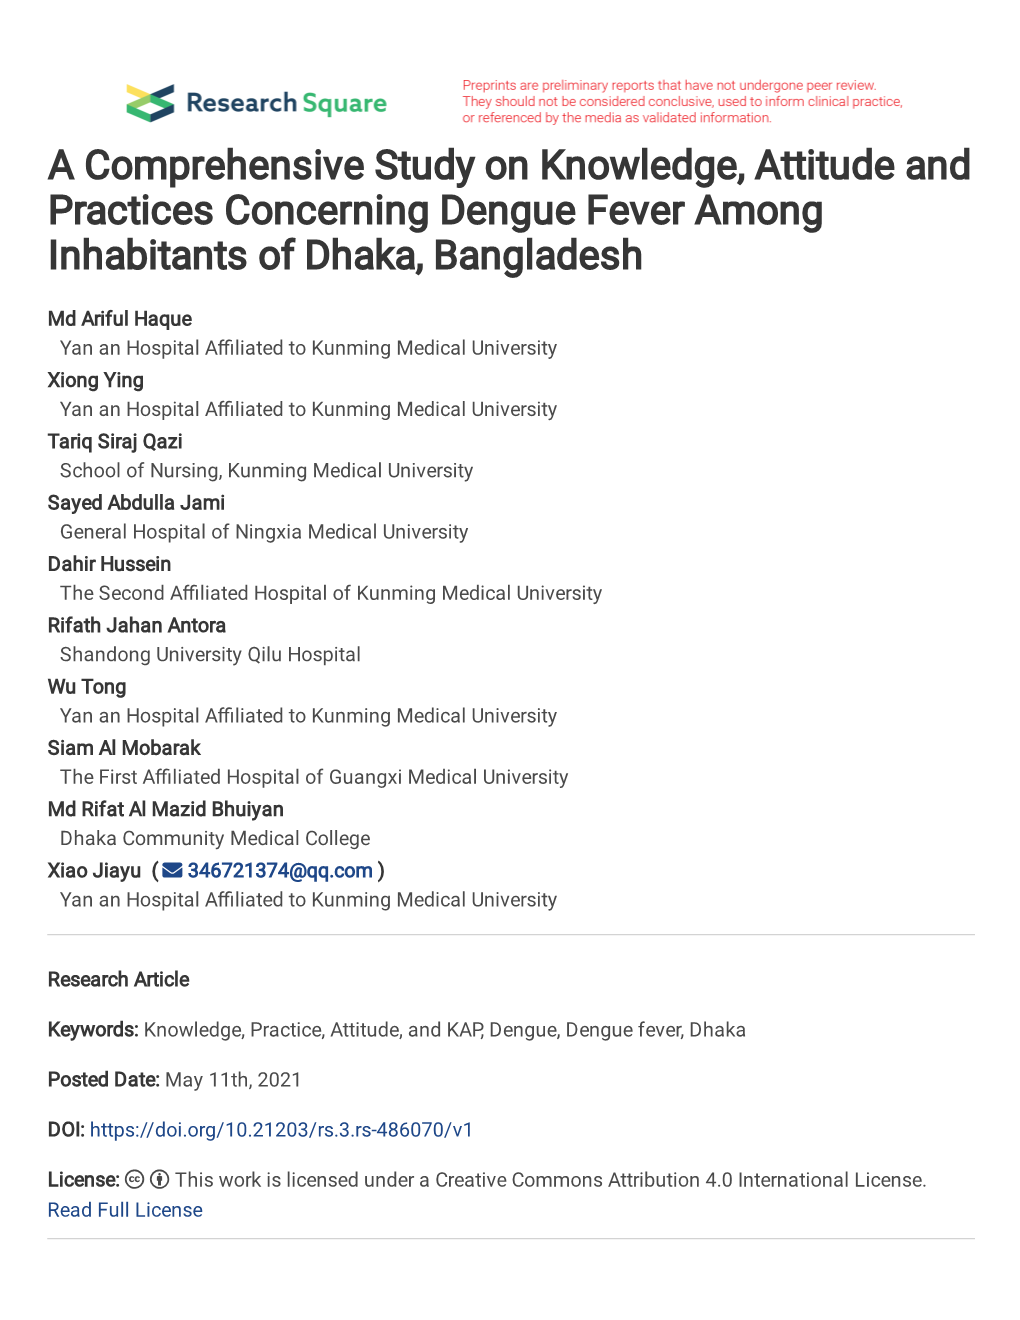 A Comprehensive Study on Knowledge, Attitude and Practices Concerning Dengue Fever Among Inhabitants of Dhaka, Bangladesh